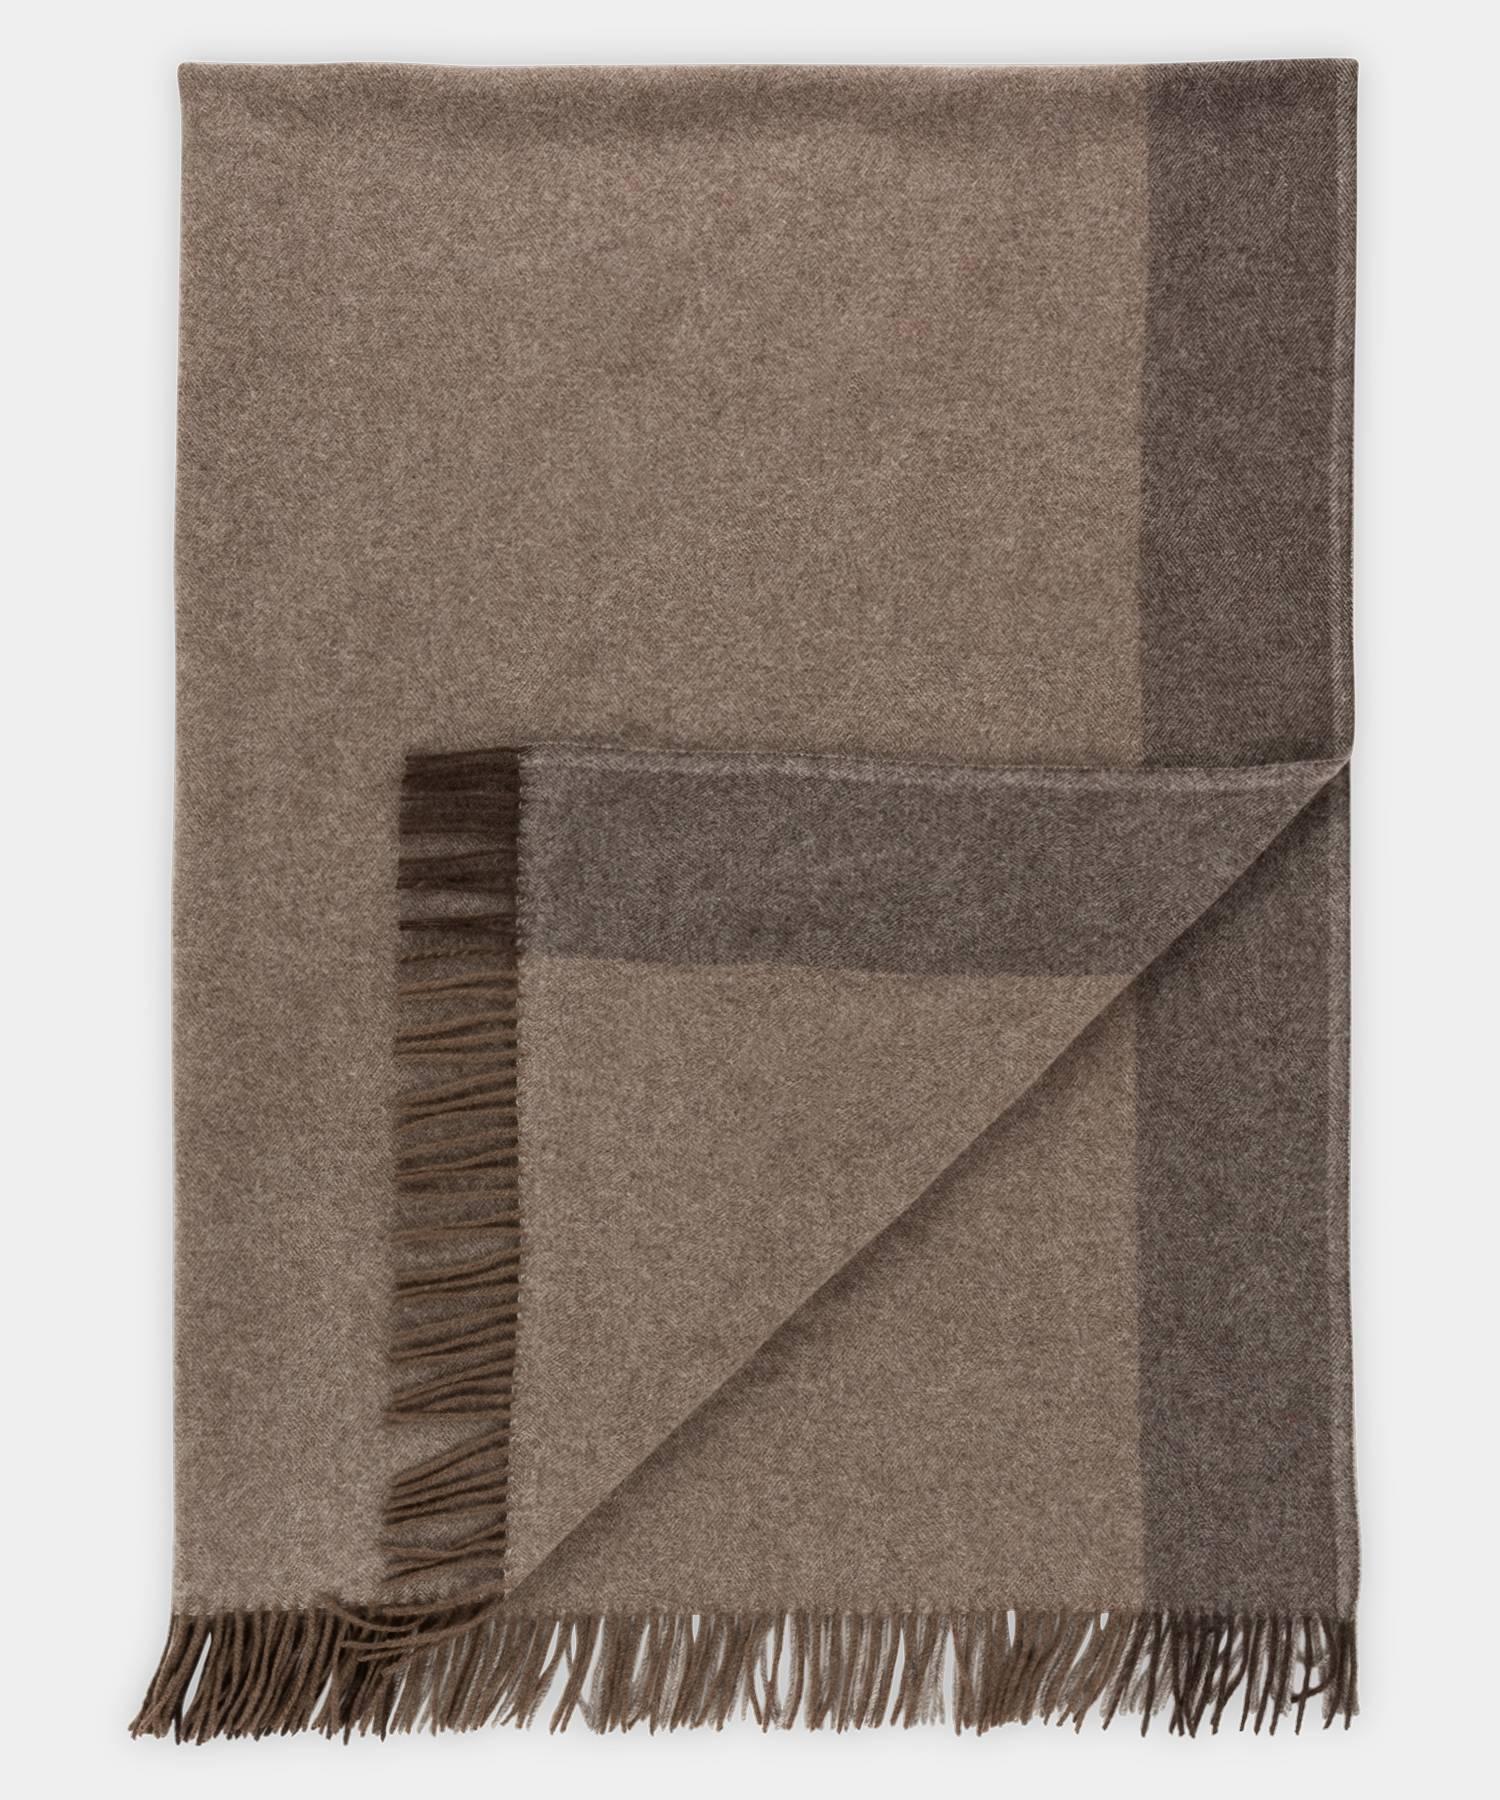 Calluna blanket by Saved, New York

Graphic contrasting stripe motif in earth tones. Available in King and Queen sizes, please inquire for pricing, availability, and lead time.

100% yak down

Measures: 59